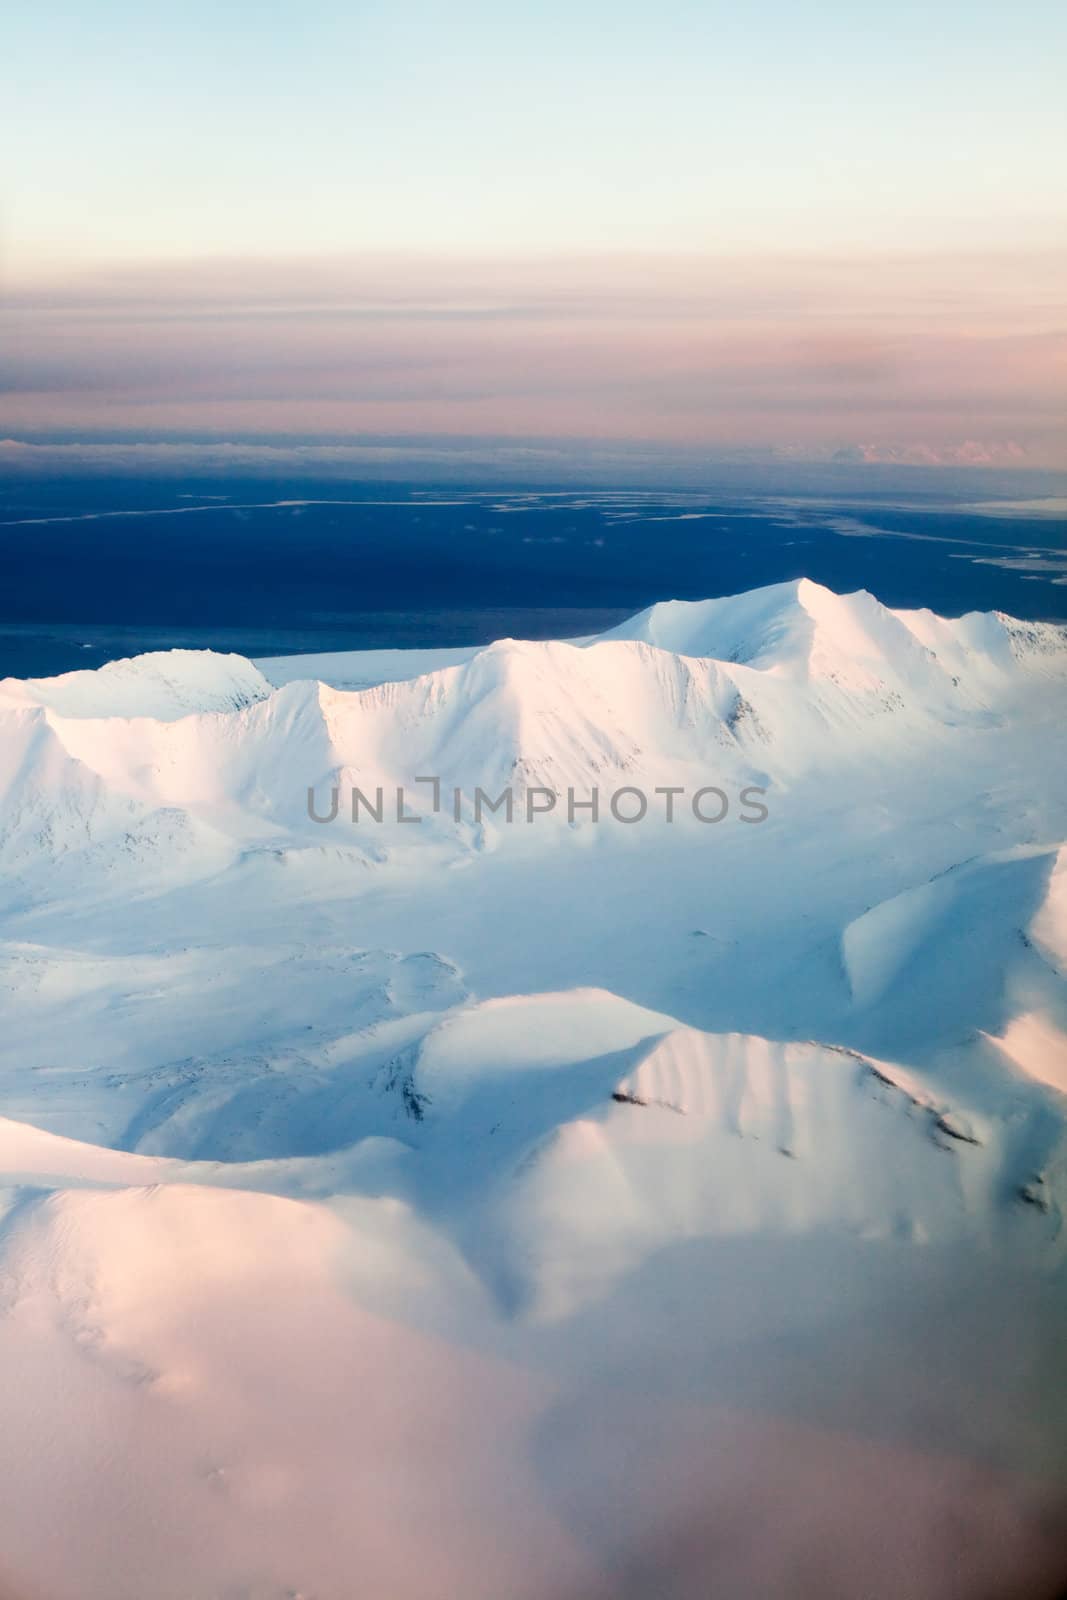 A mountain landscape filled with snow, Svalbard, Norway